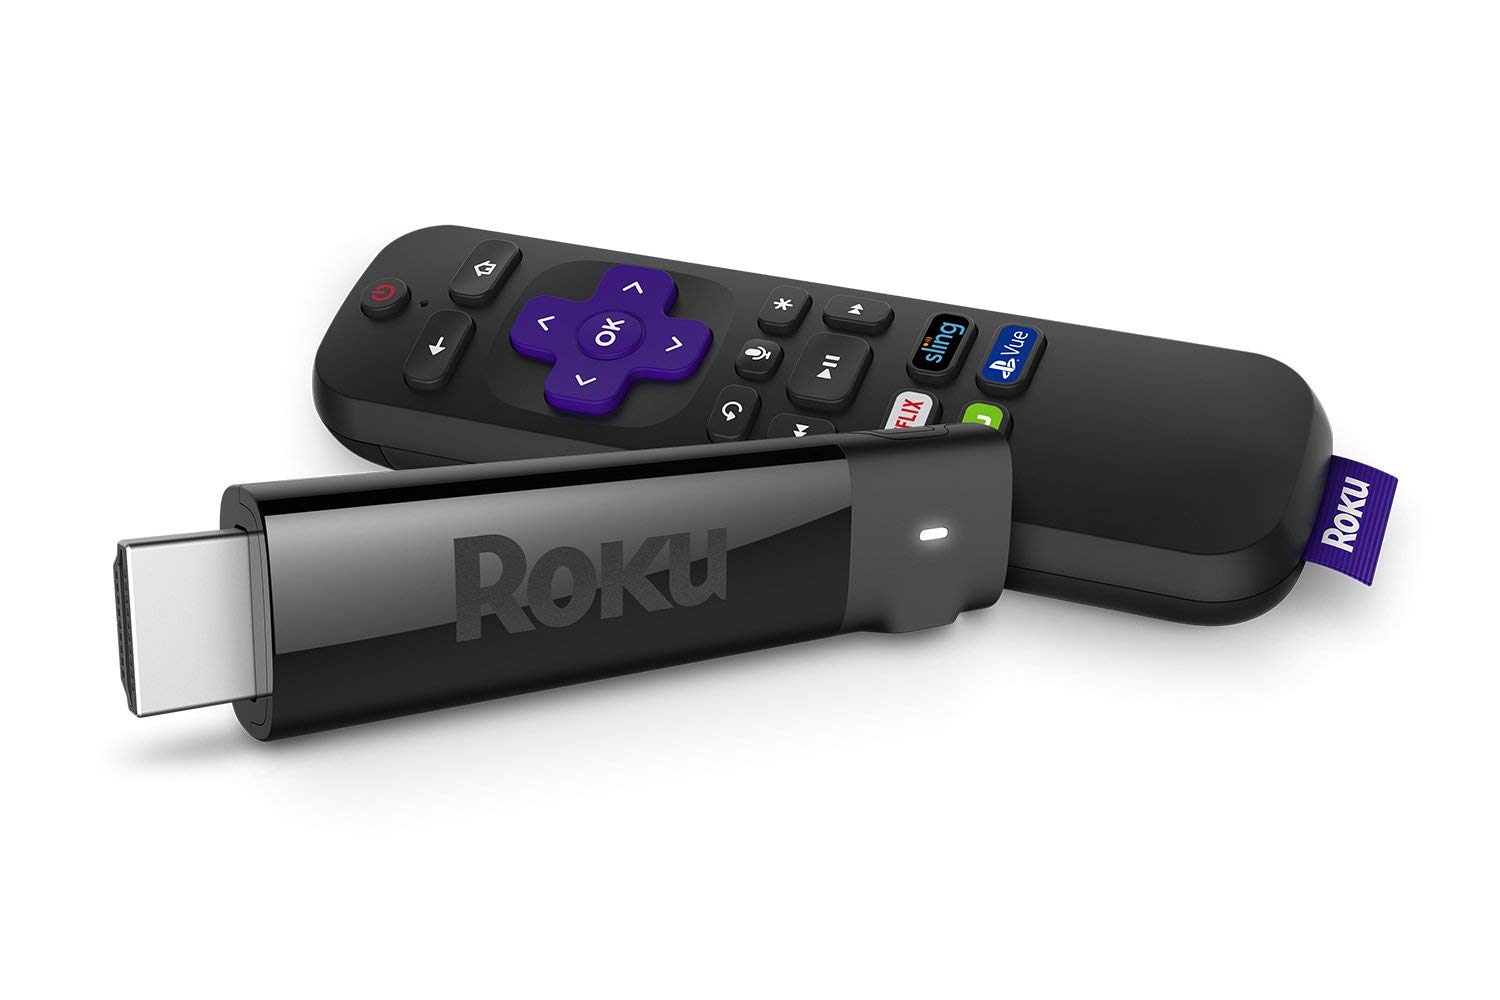 EXPIRED: Roku’s Amazon Prime Day Sale Likely Ends Tonight! Act Now to Get a $49 Roku Stick+ & $69 Roku Ultra